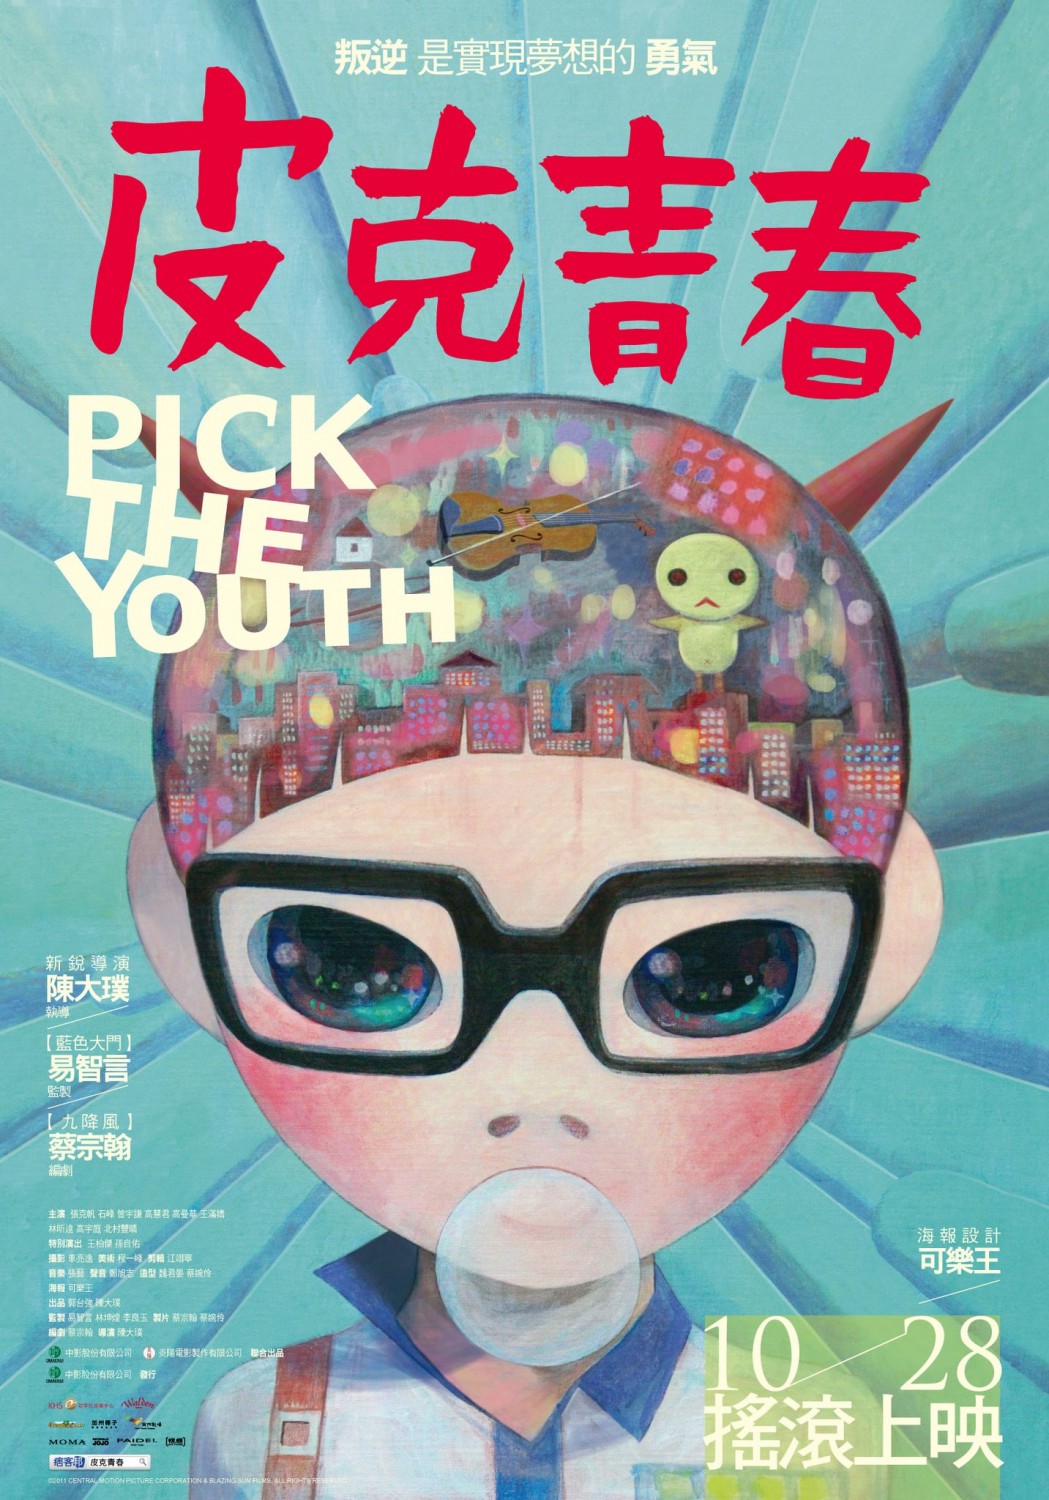 Extra Large Movie Poster Image for Pick the Youth 